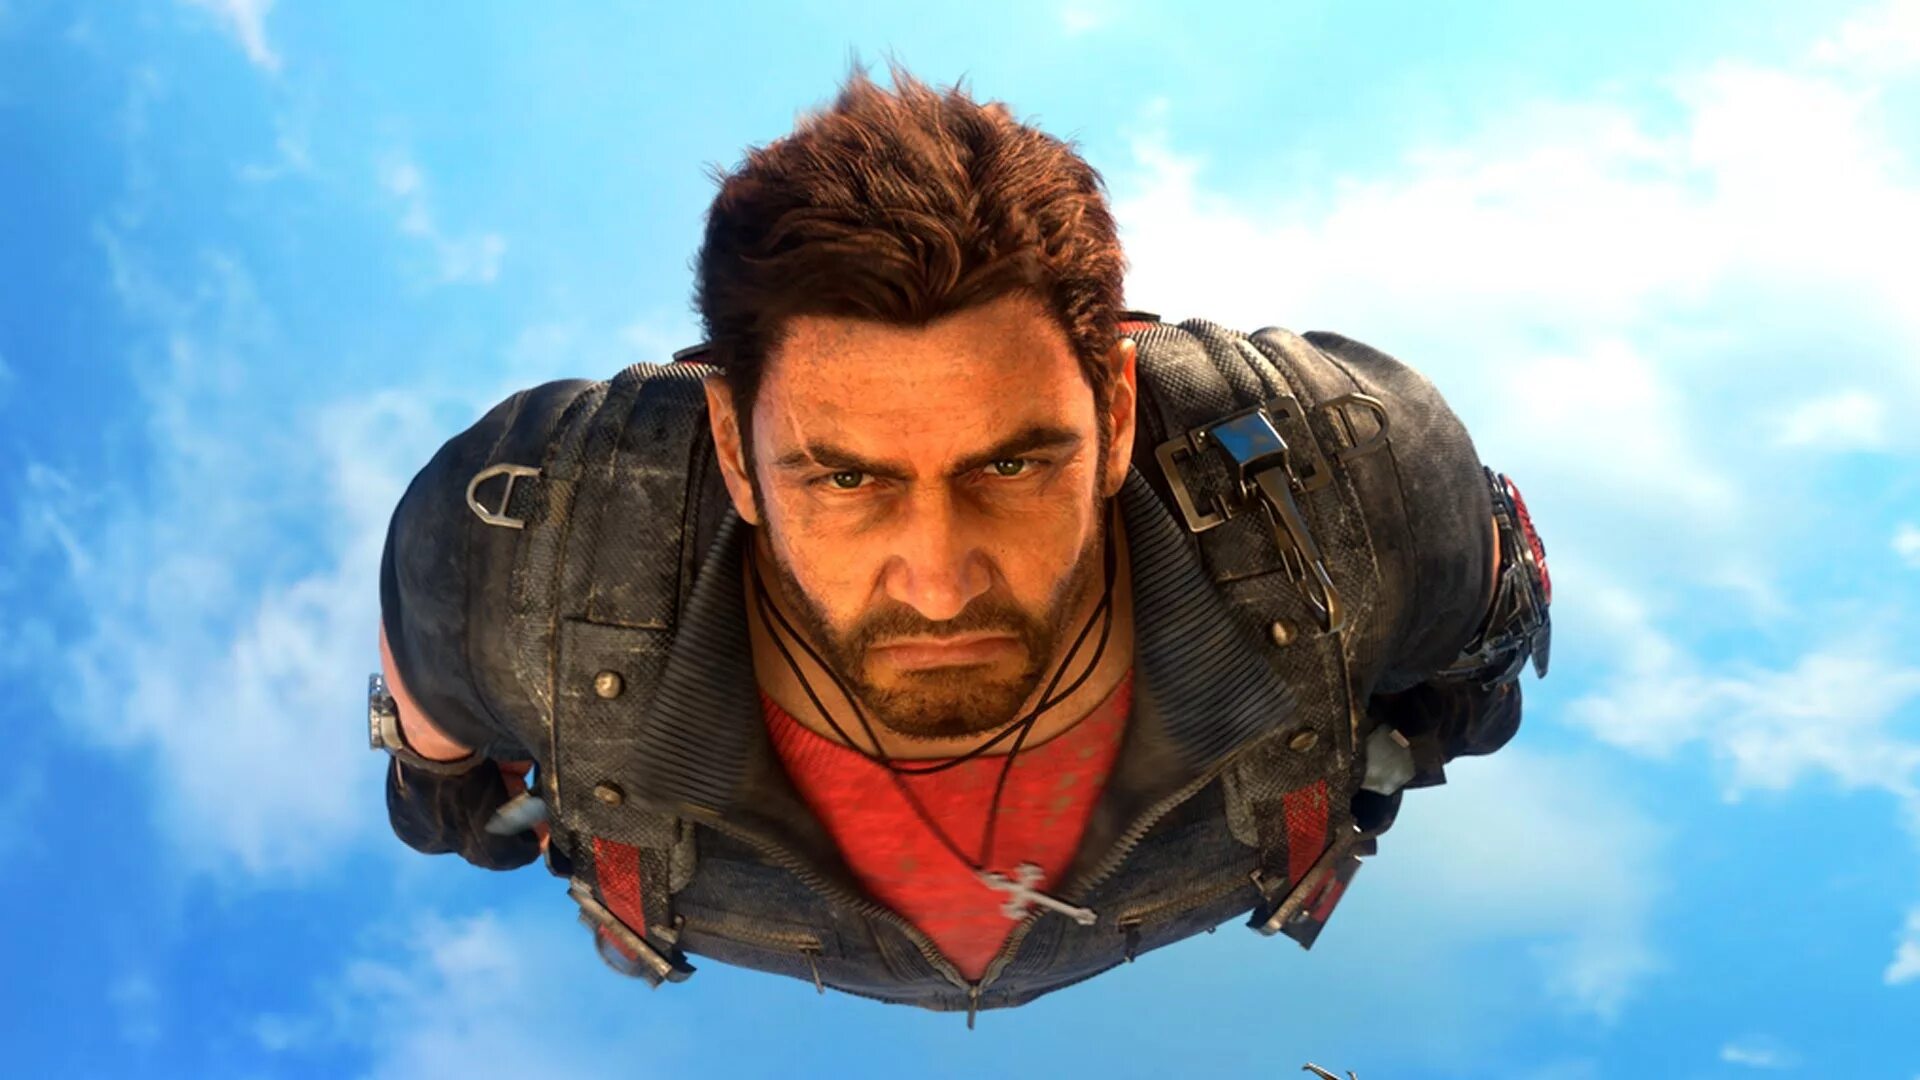 Max cause. Рико Родригес just cause 1. Рико Родригес just cause 3. Рико Родригес just cause 2. Рико Родригес just cause 4.